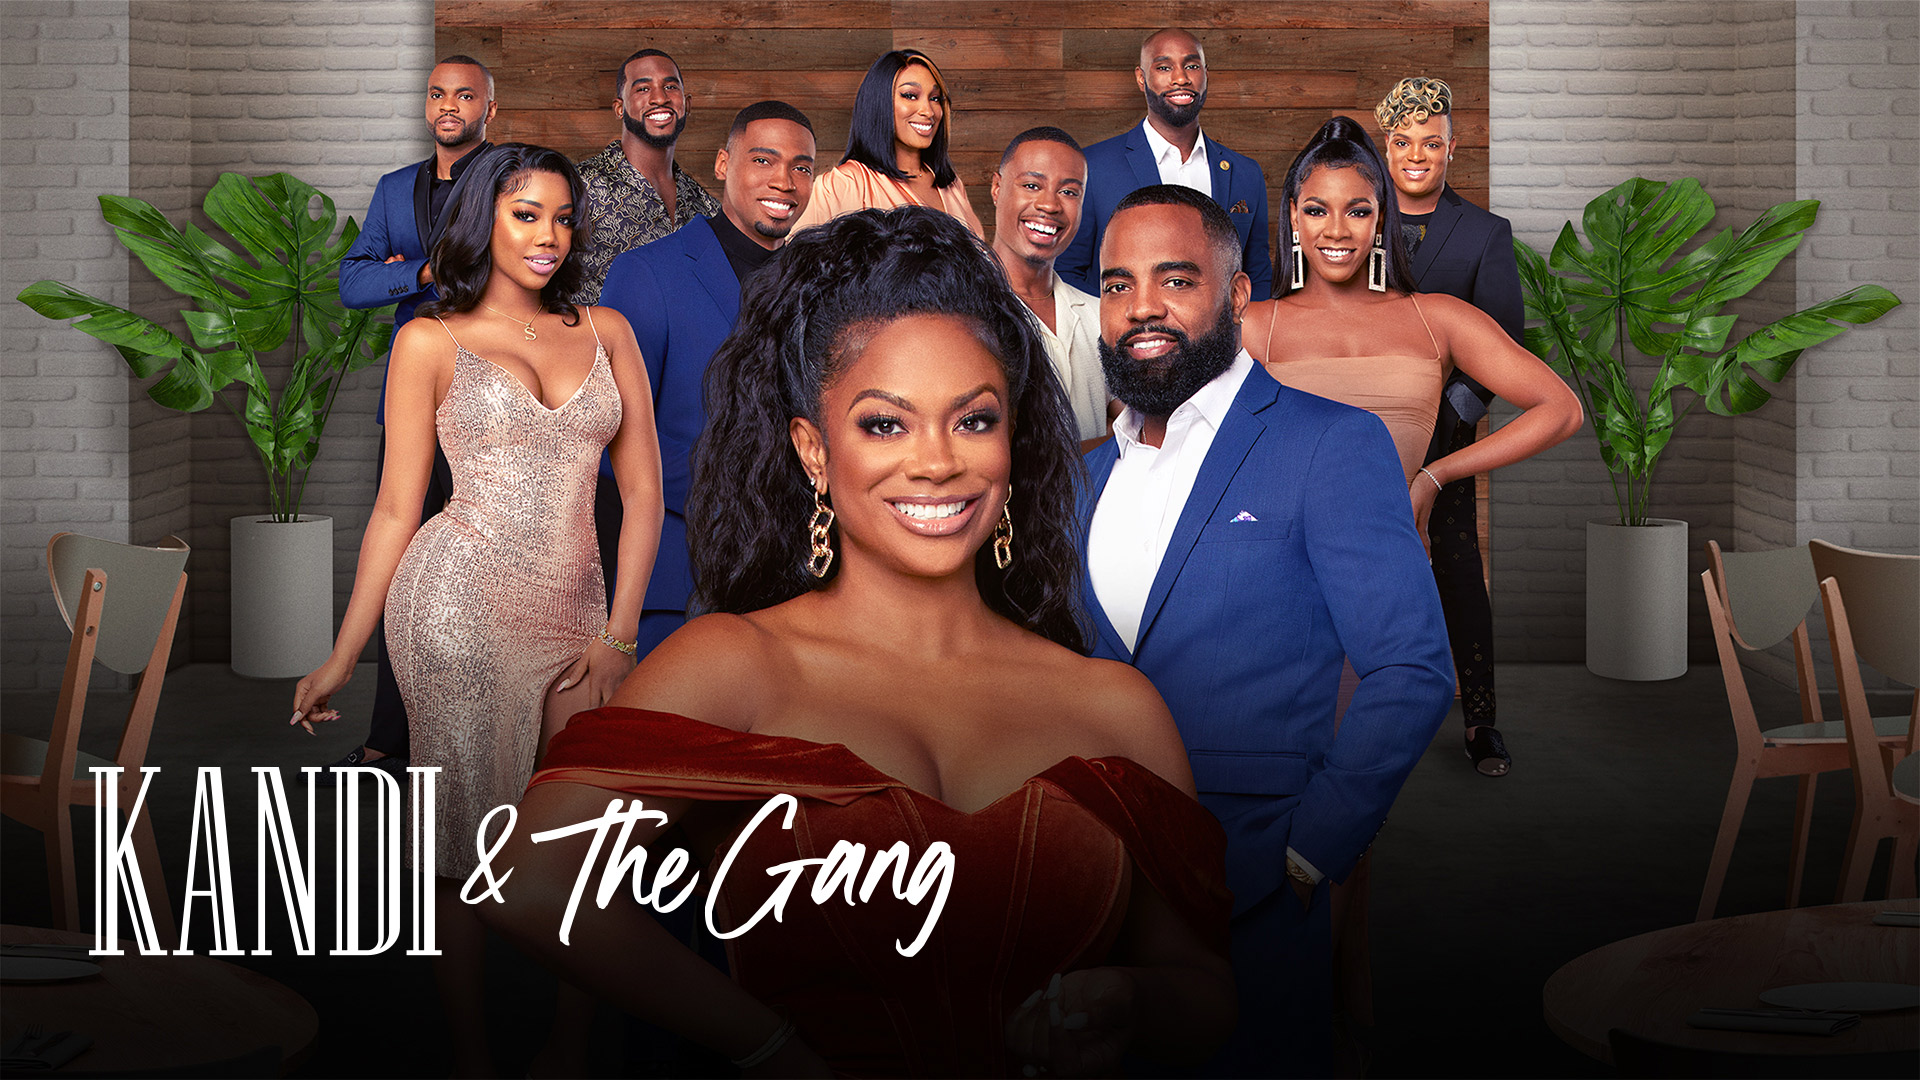 Kandi & the Gang - New Series March 6